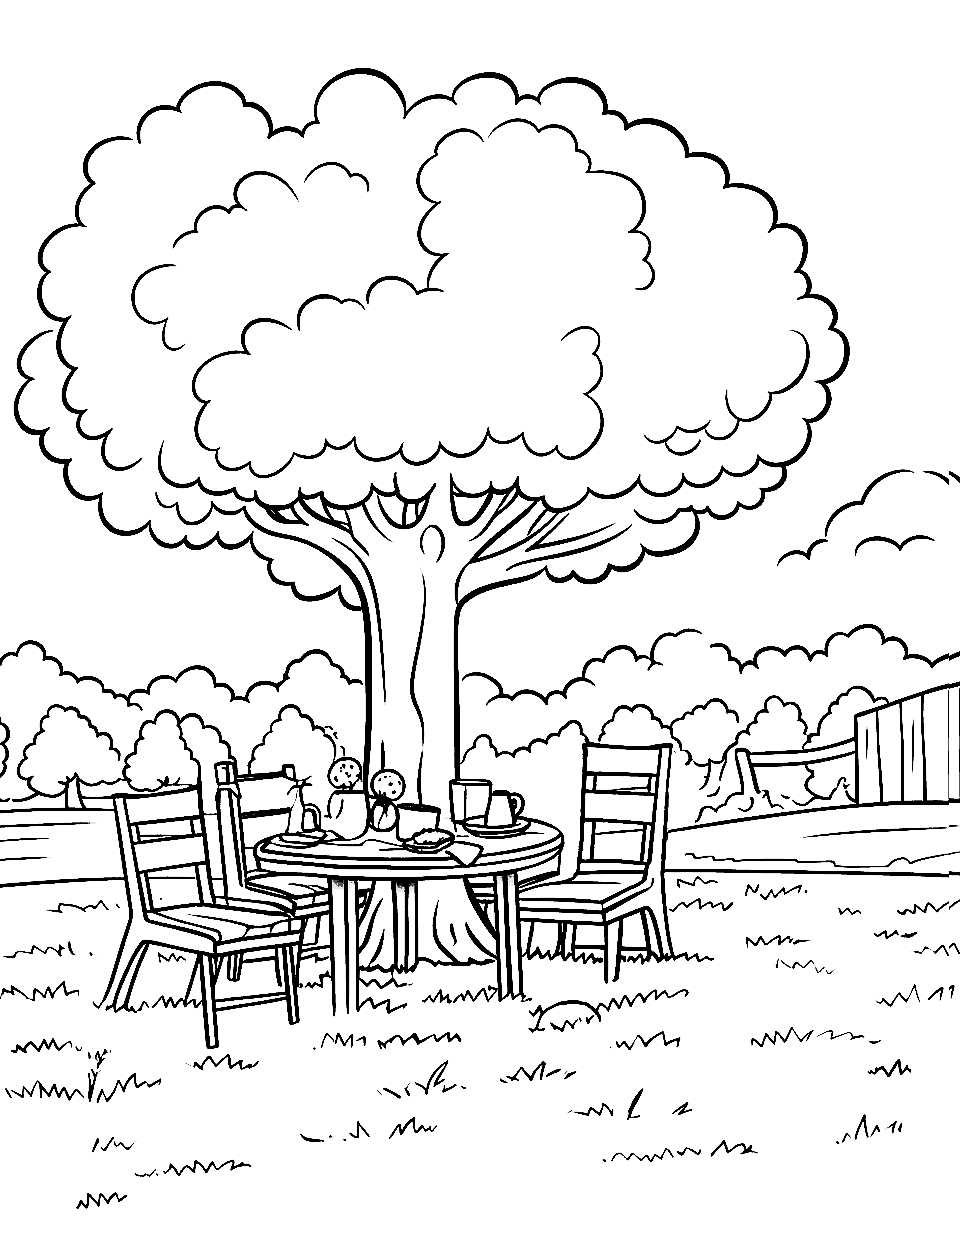 Picnic on the Farm Coloring Page - A picnic setup under a tree in the farm.